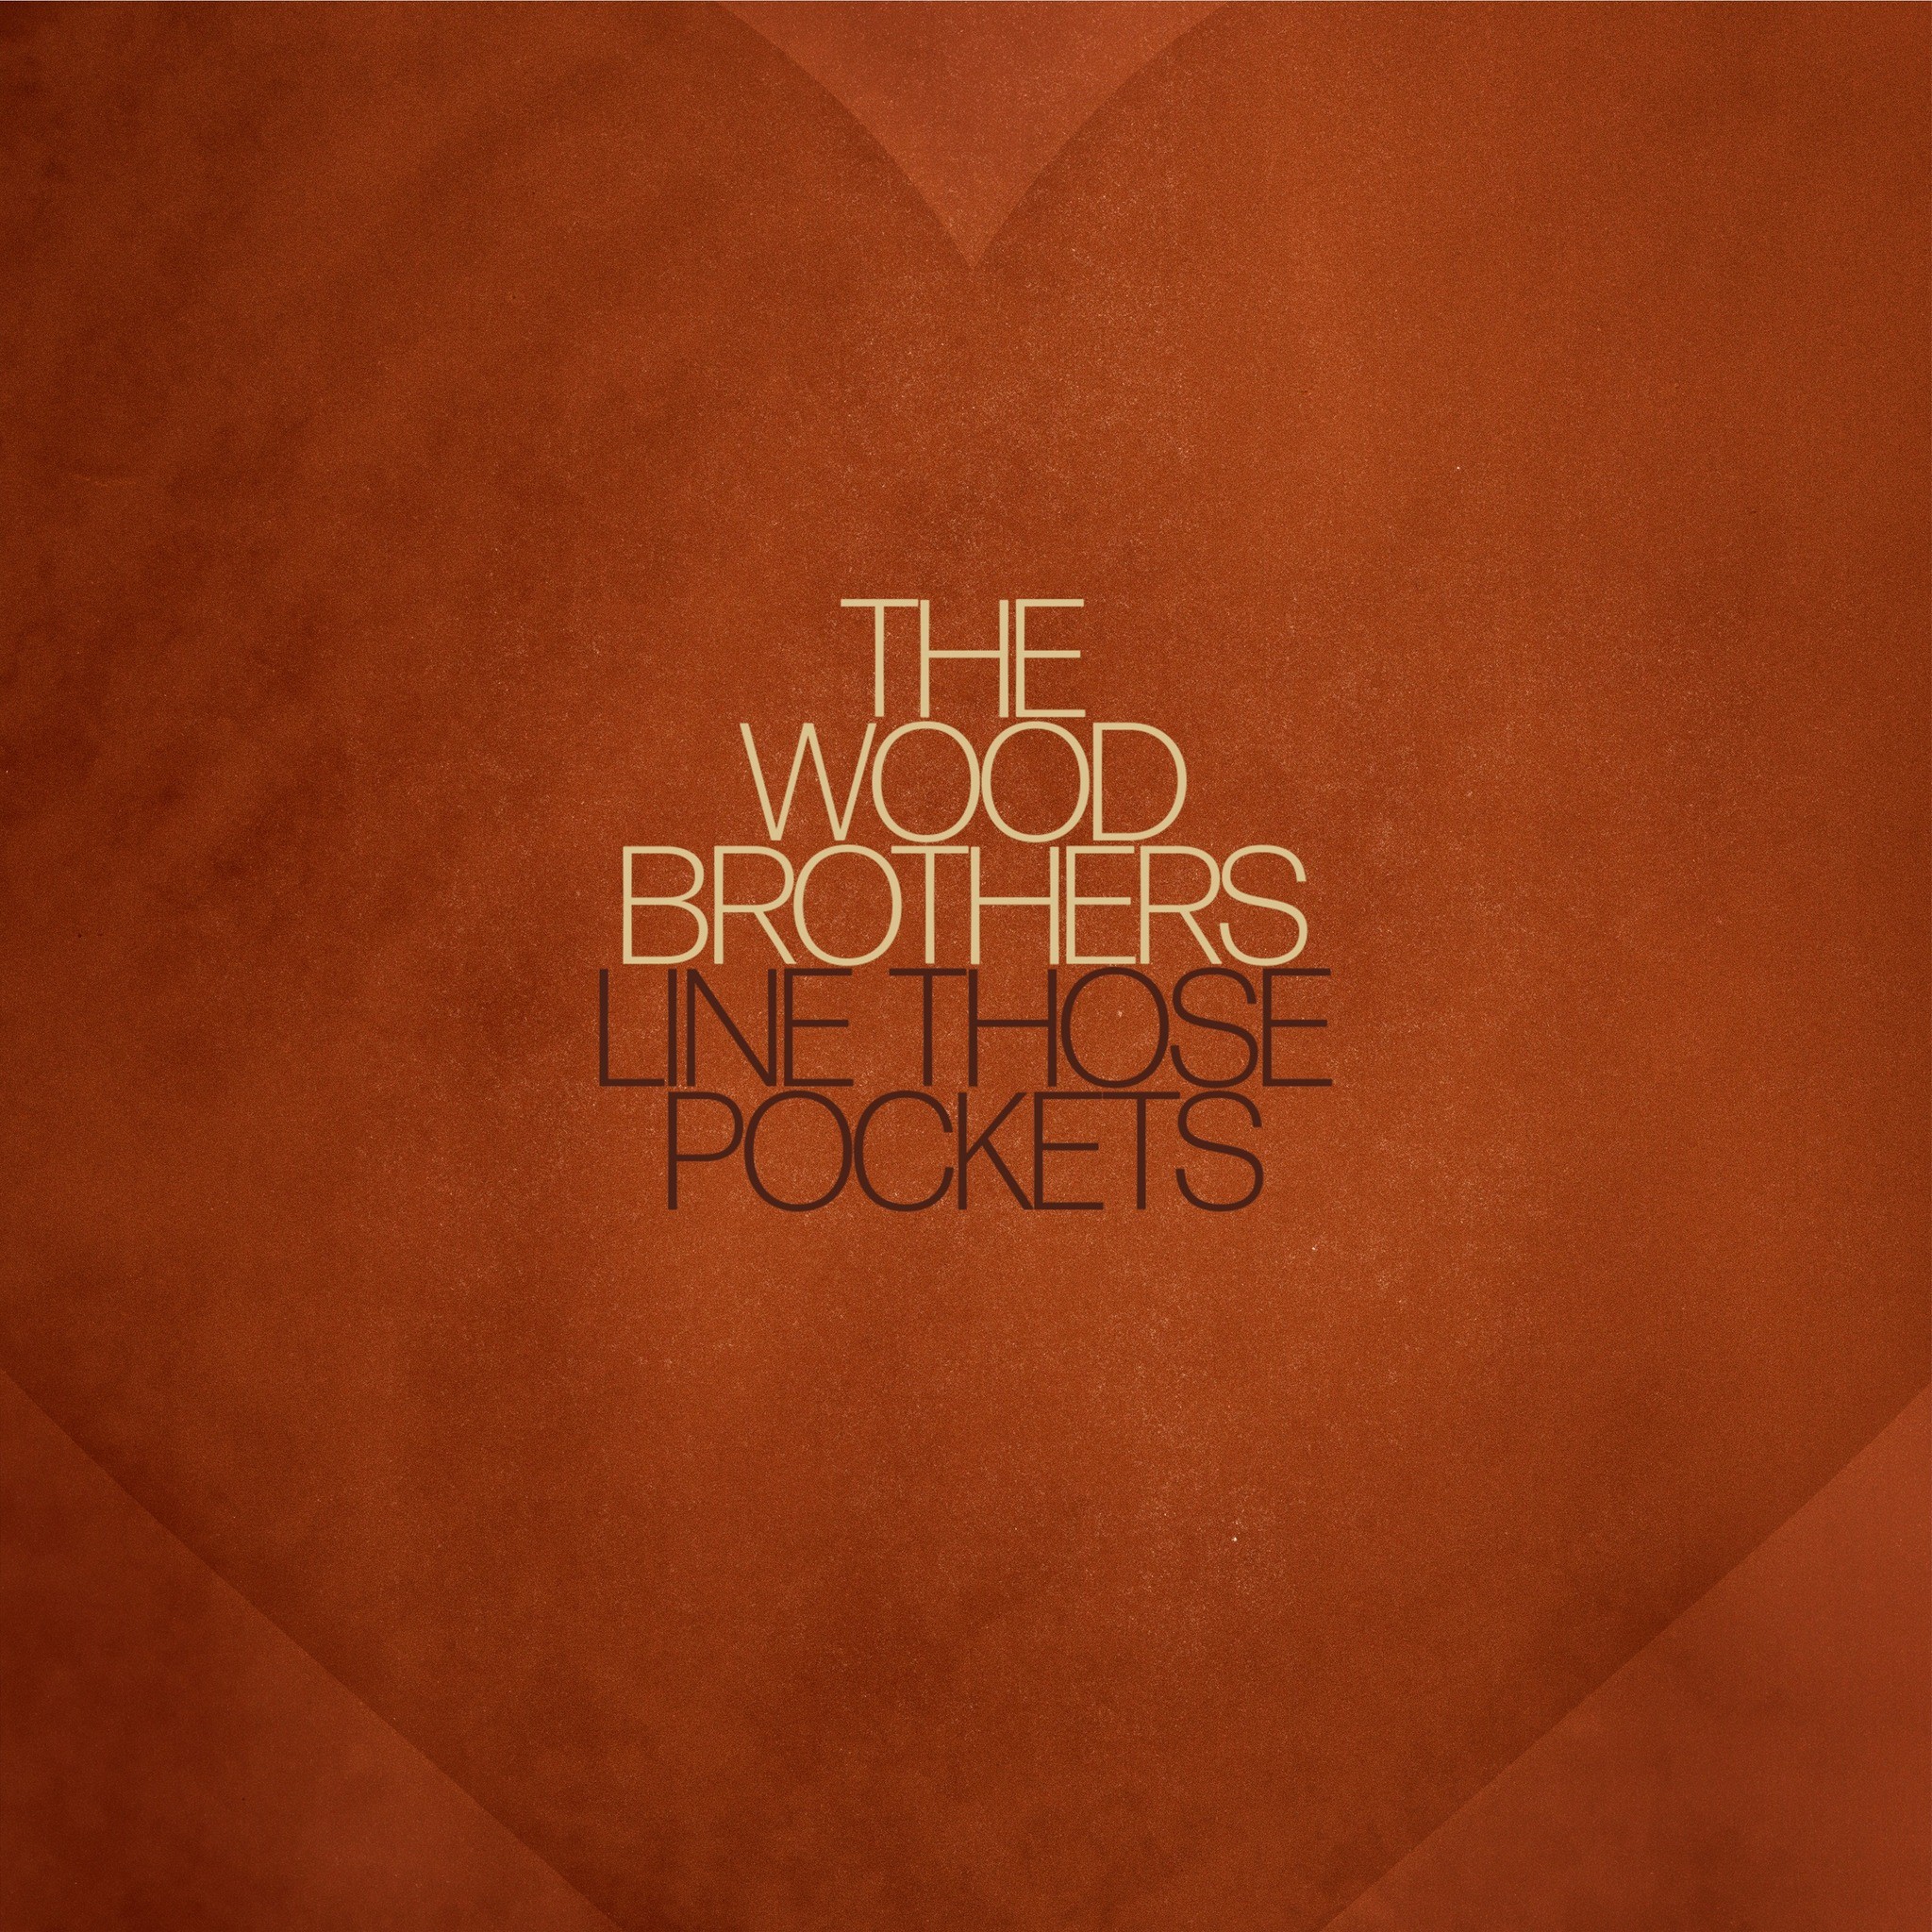 The Wood Brothers - Line Those Pockets